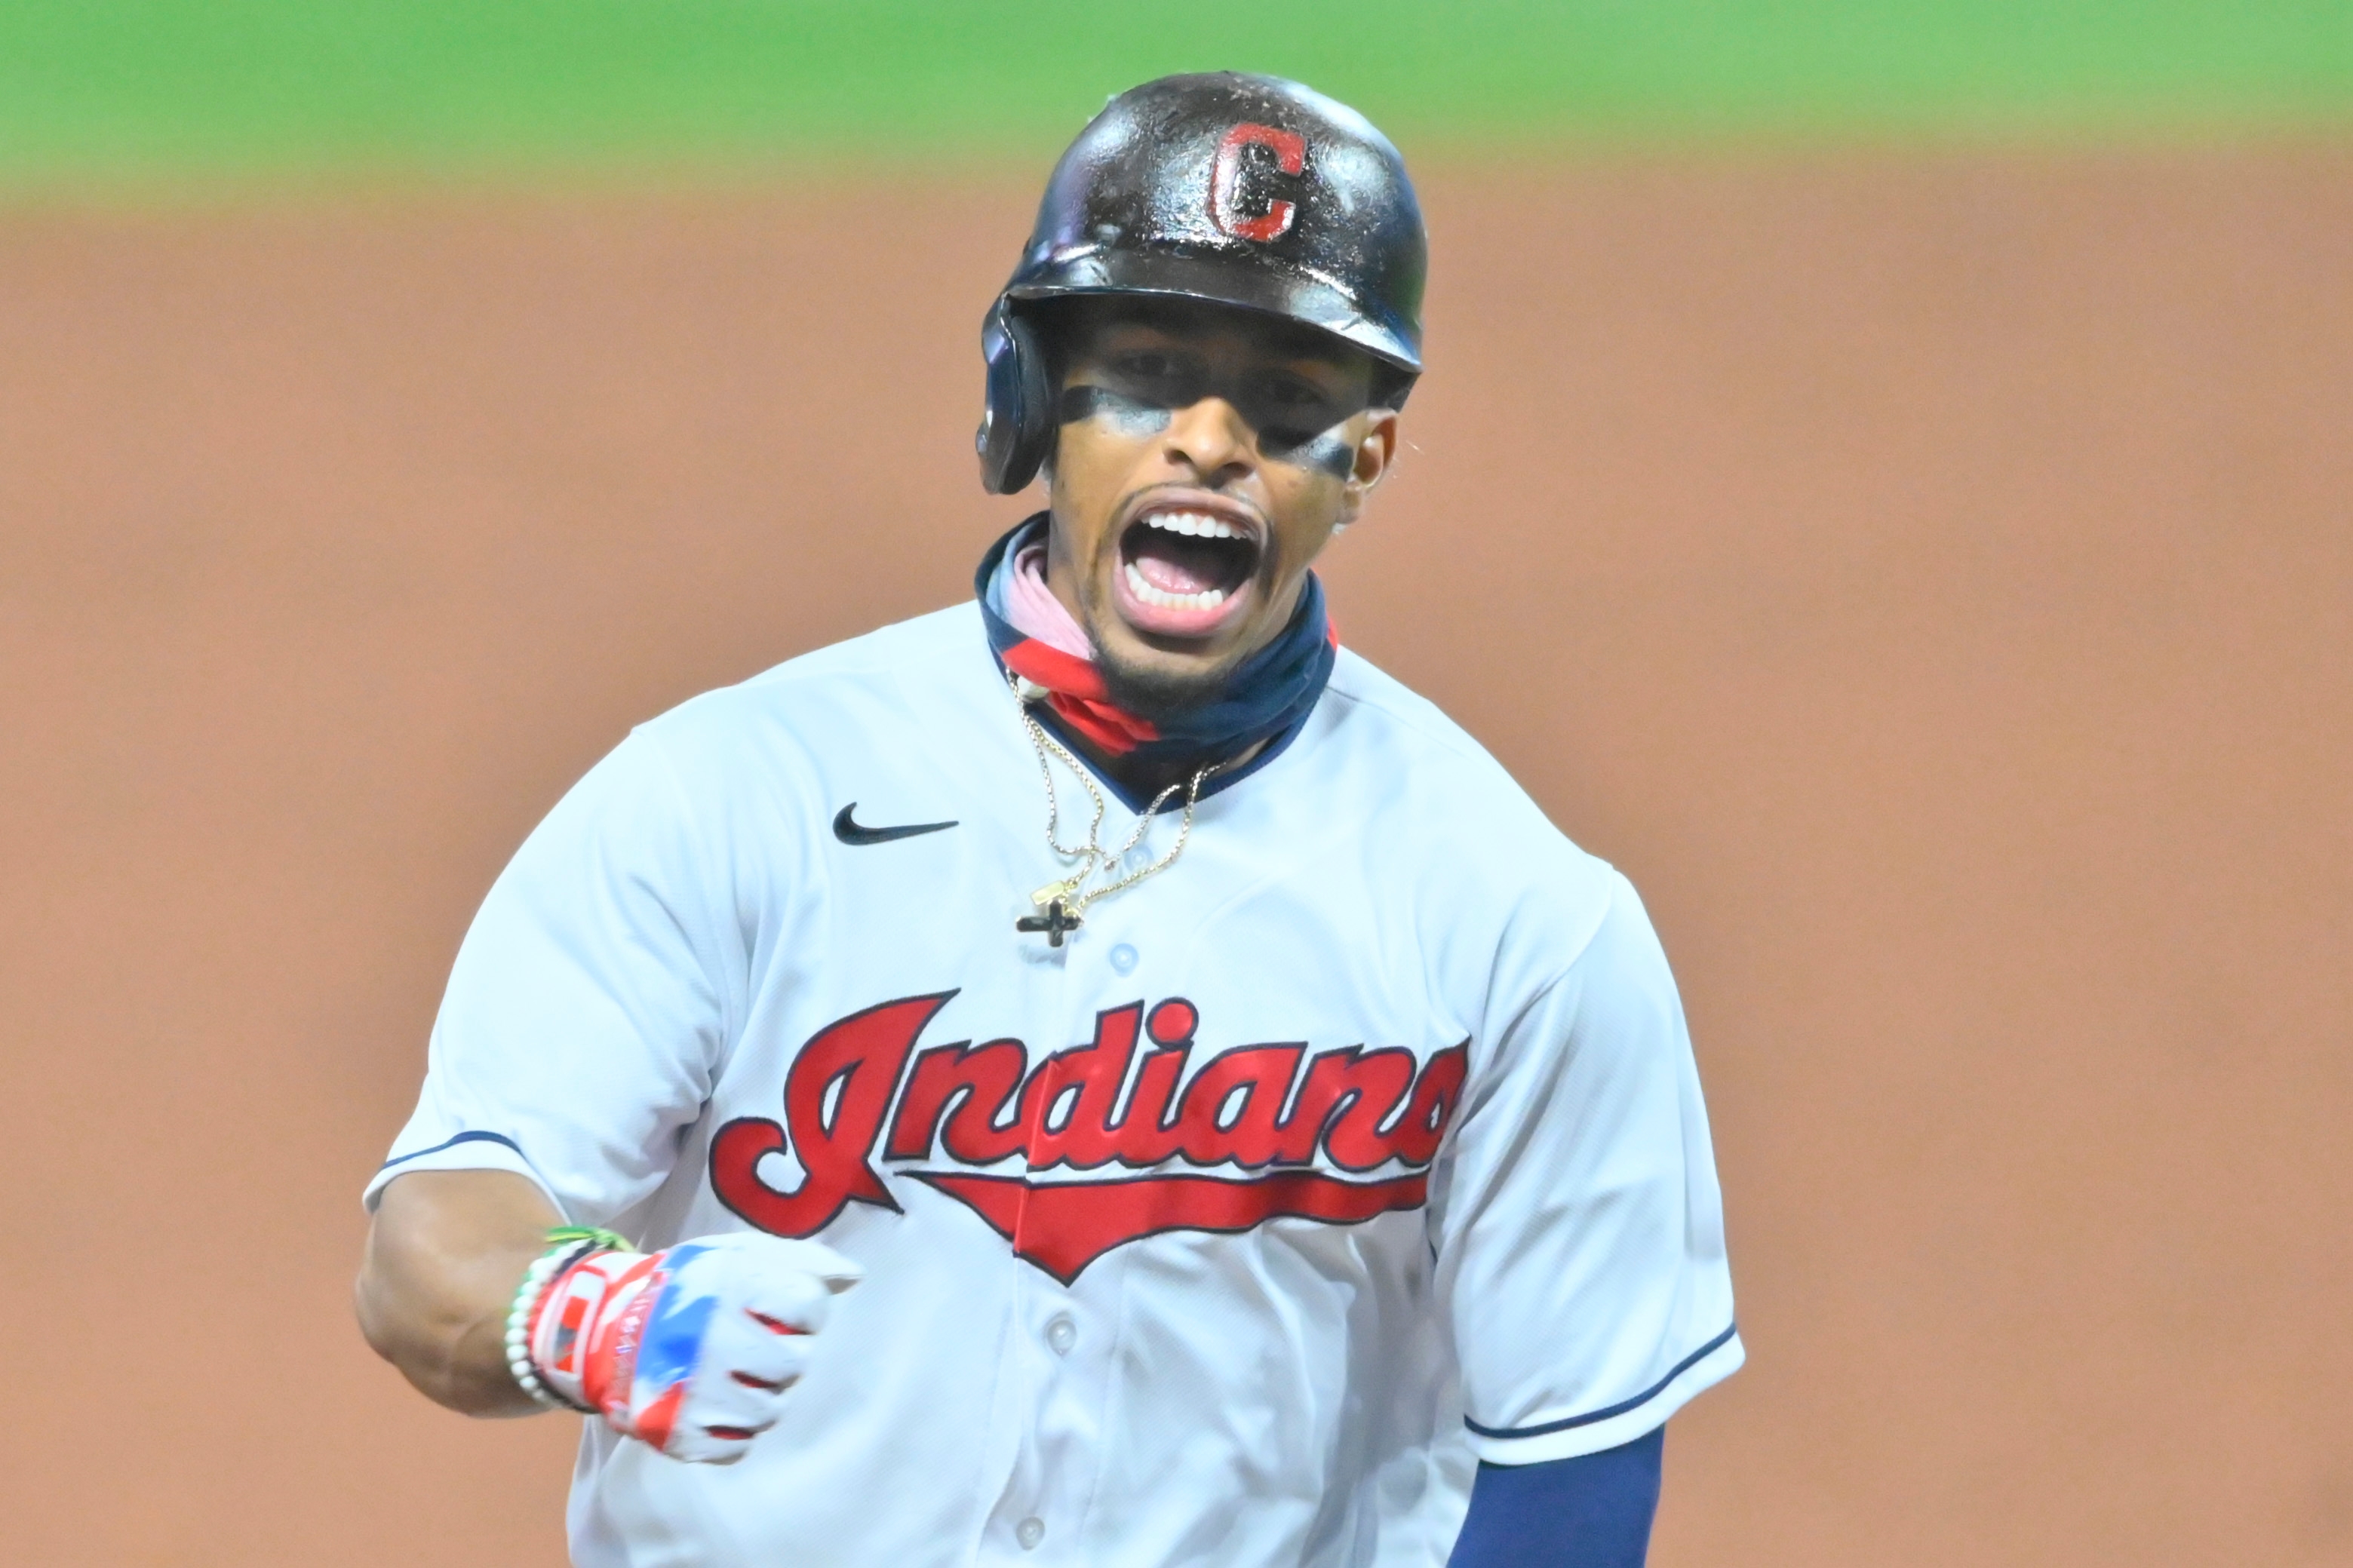 If this is the cost for the Reds to acquire Francisco Lindor